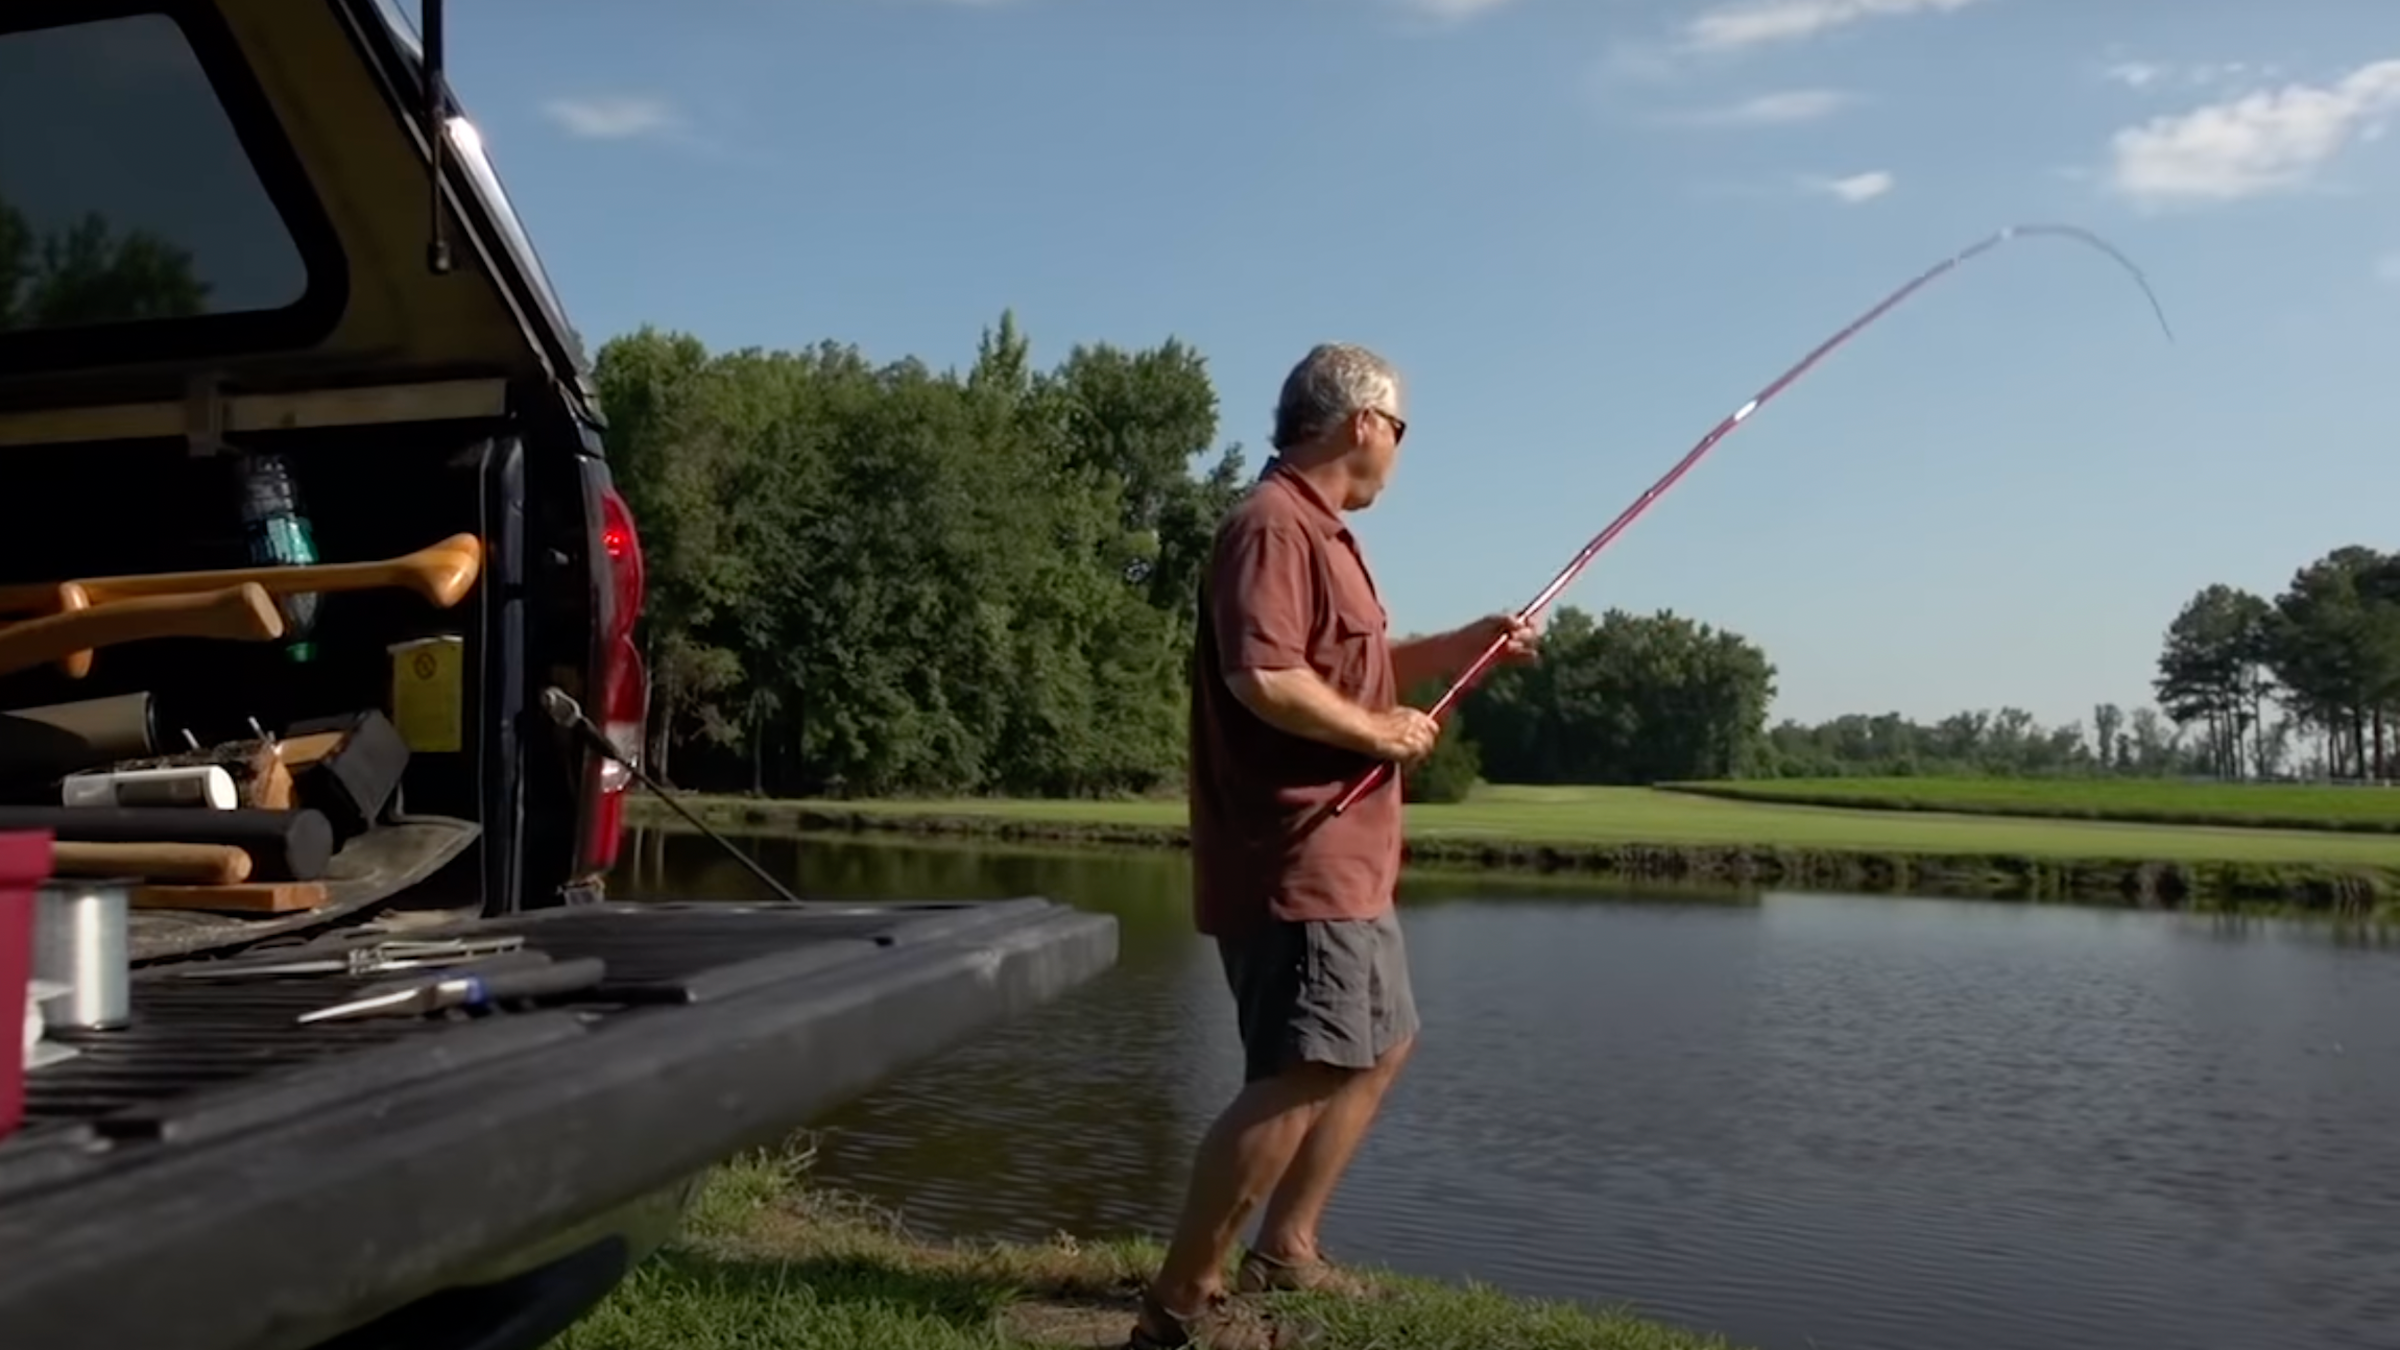 How to Make an Old-Fashioned Cane Fishing Pole 